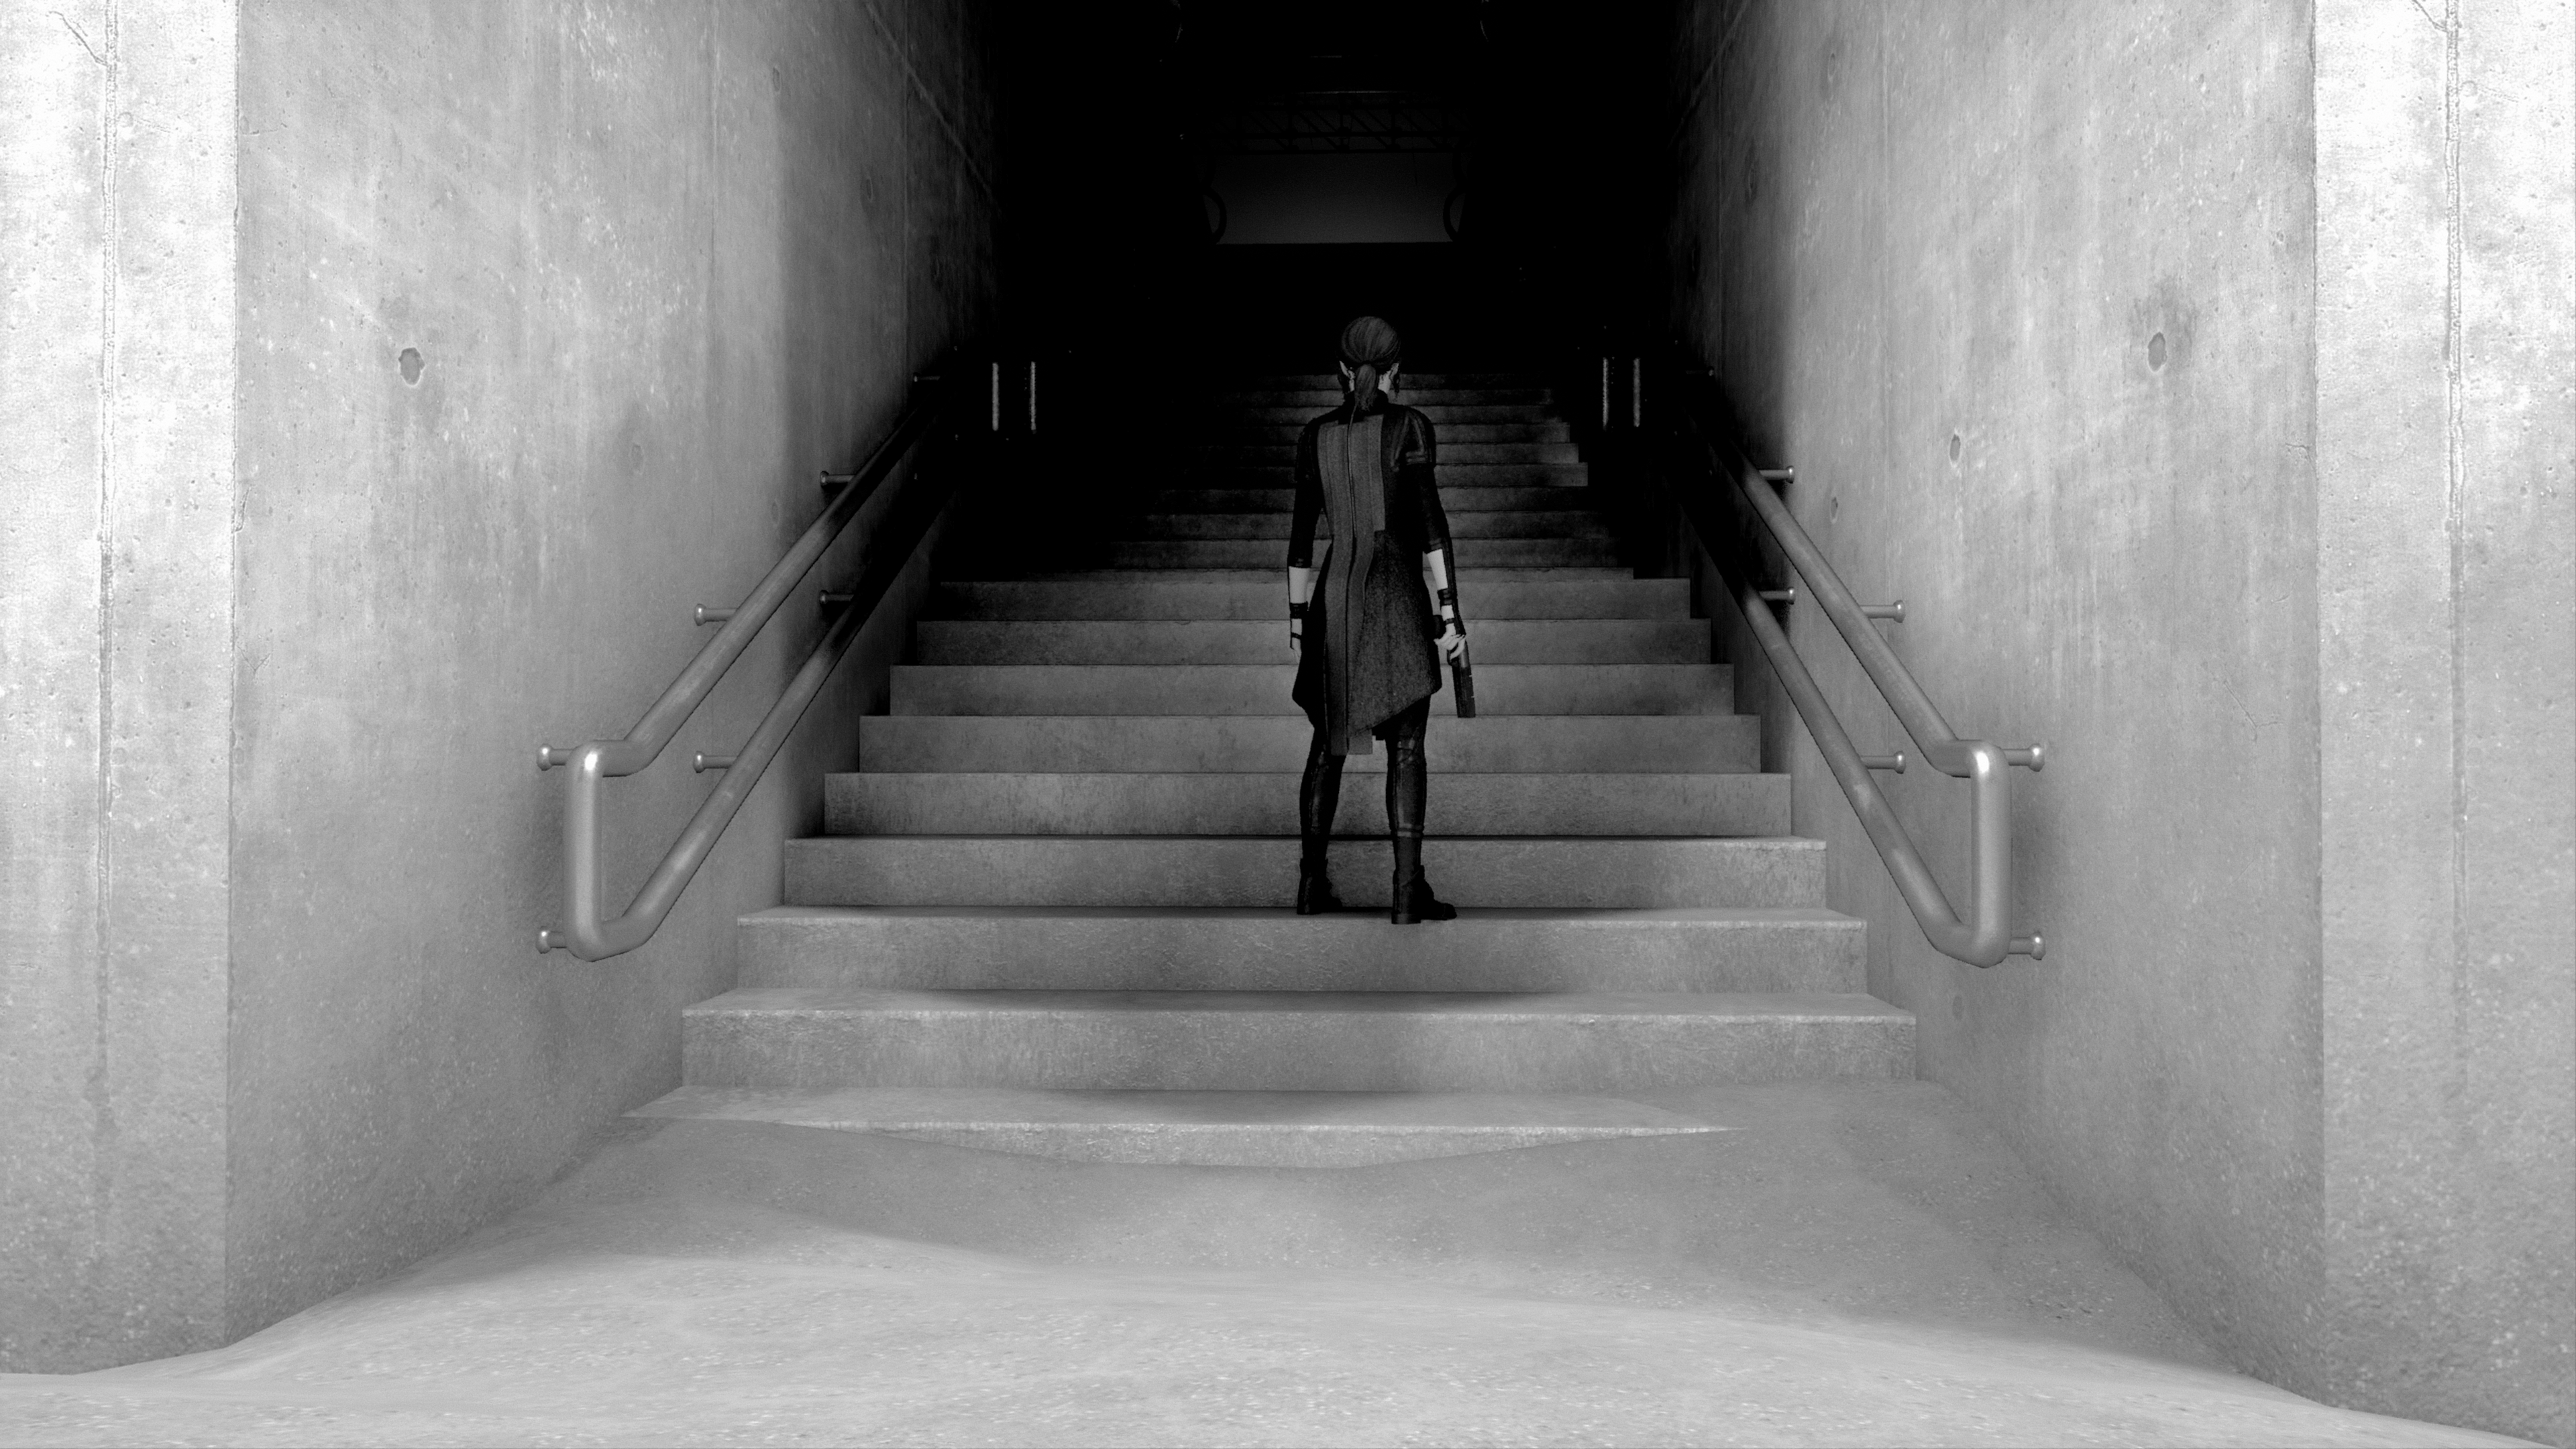 In-game photograph. The protagonist Jesse ascends a set of concrete stairs into the darkness.